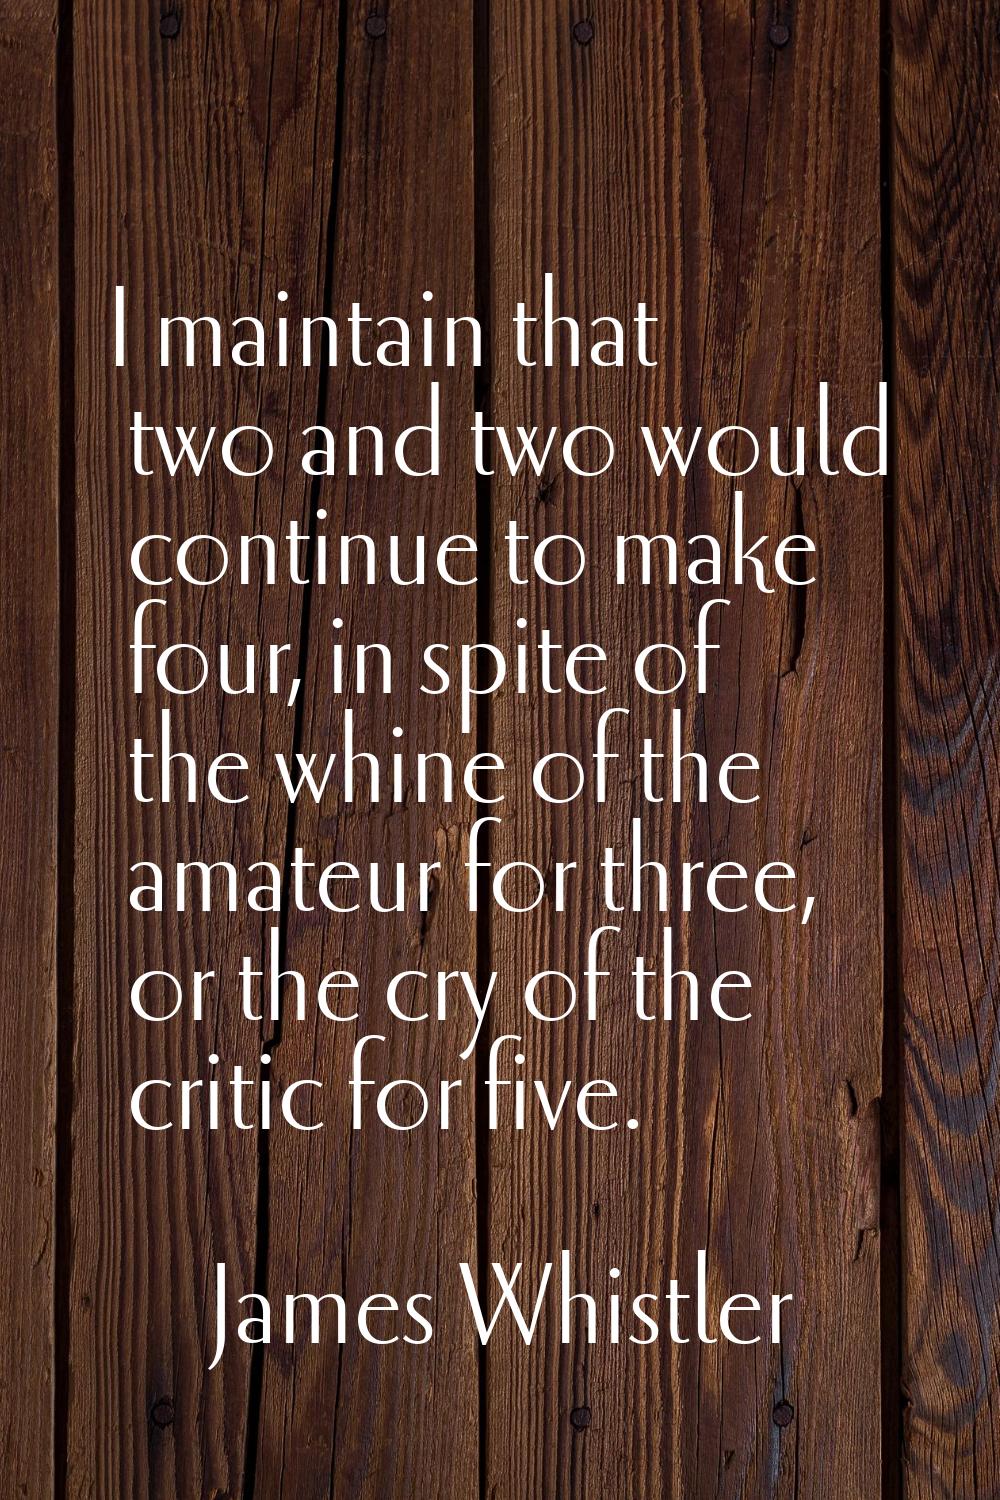 I maintain that two and two would continue to make four, in spite of the whine of the amateur for t